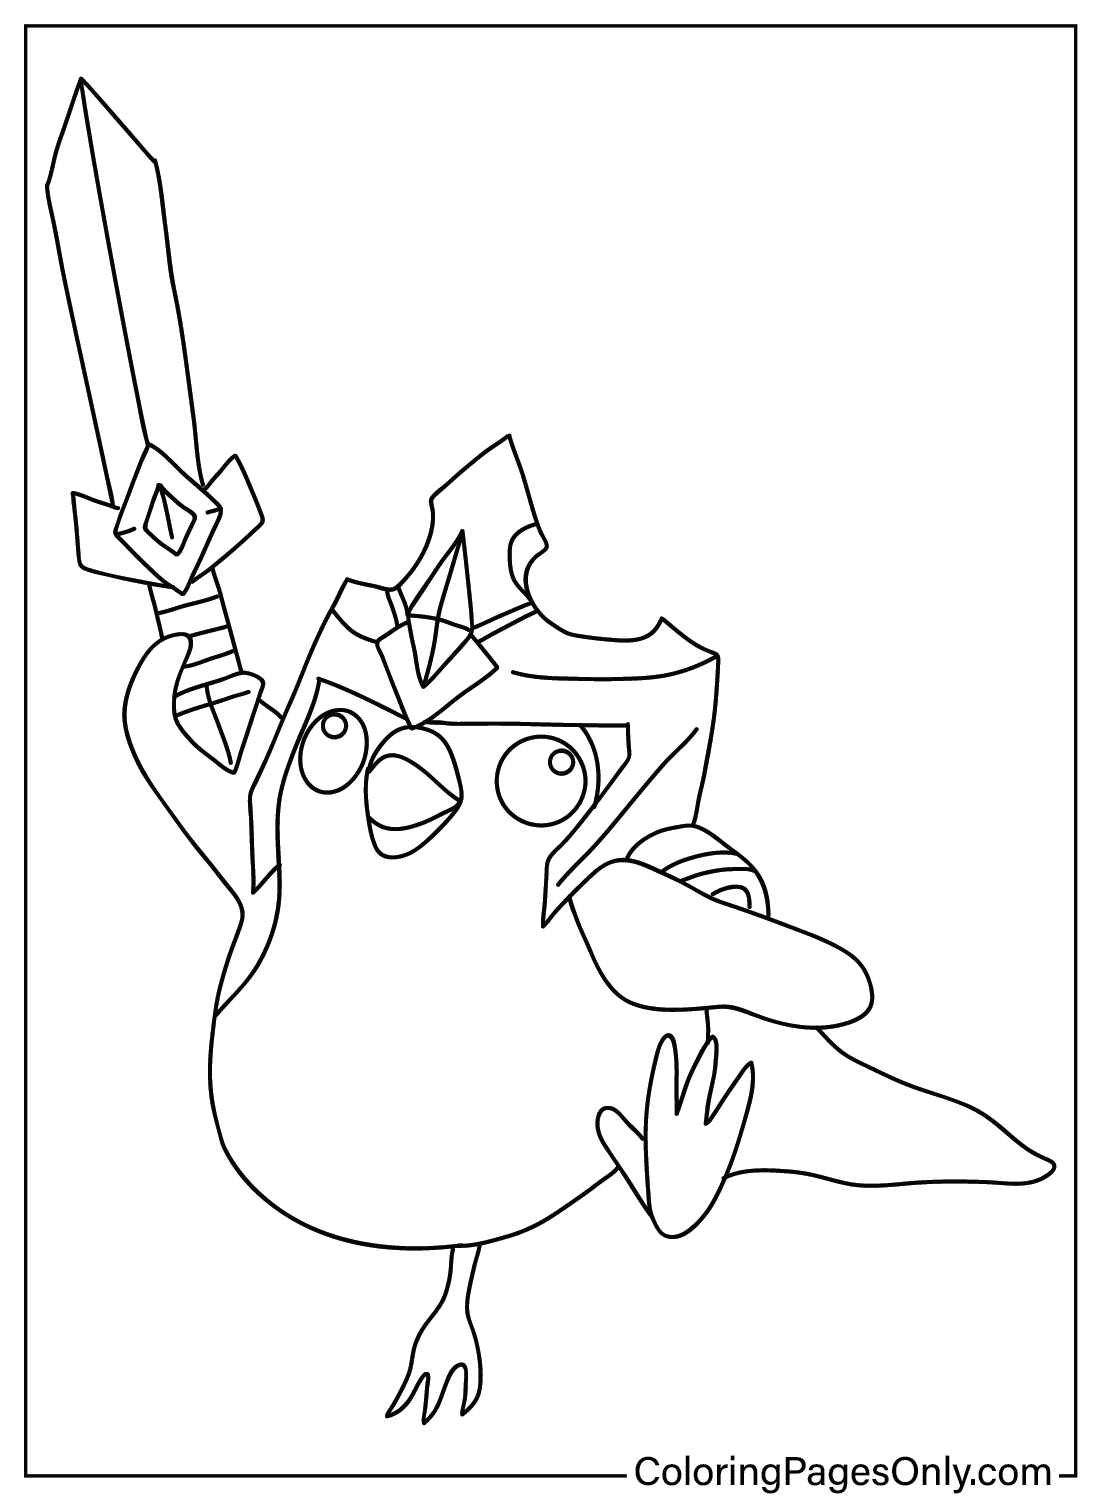 Featherknight Teamfight Tactics Coloring Page from Teamfight Tactics